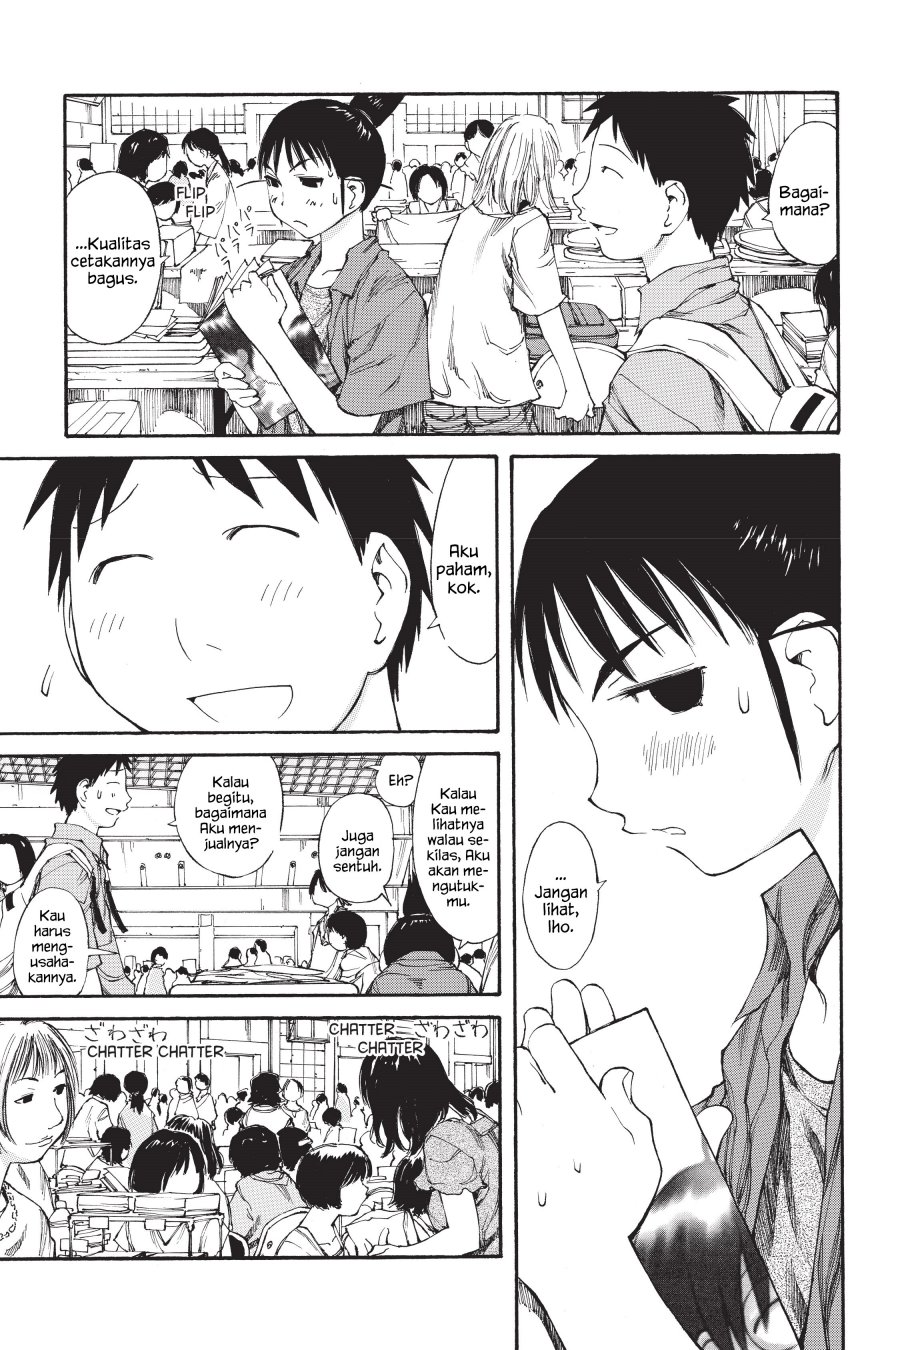 Genshiken – The Society for the Study of Modern Visual Culture Chapter 41 Image 6